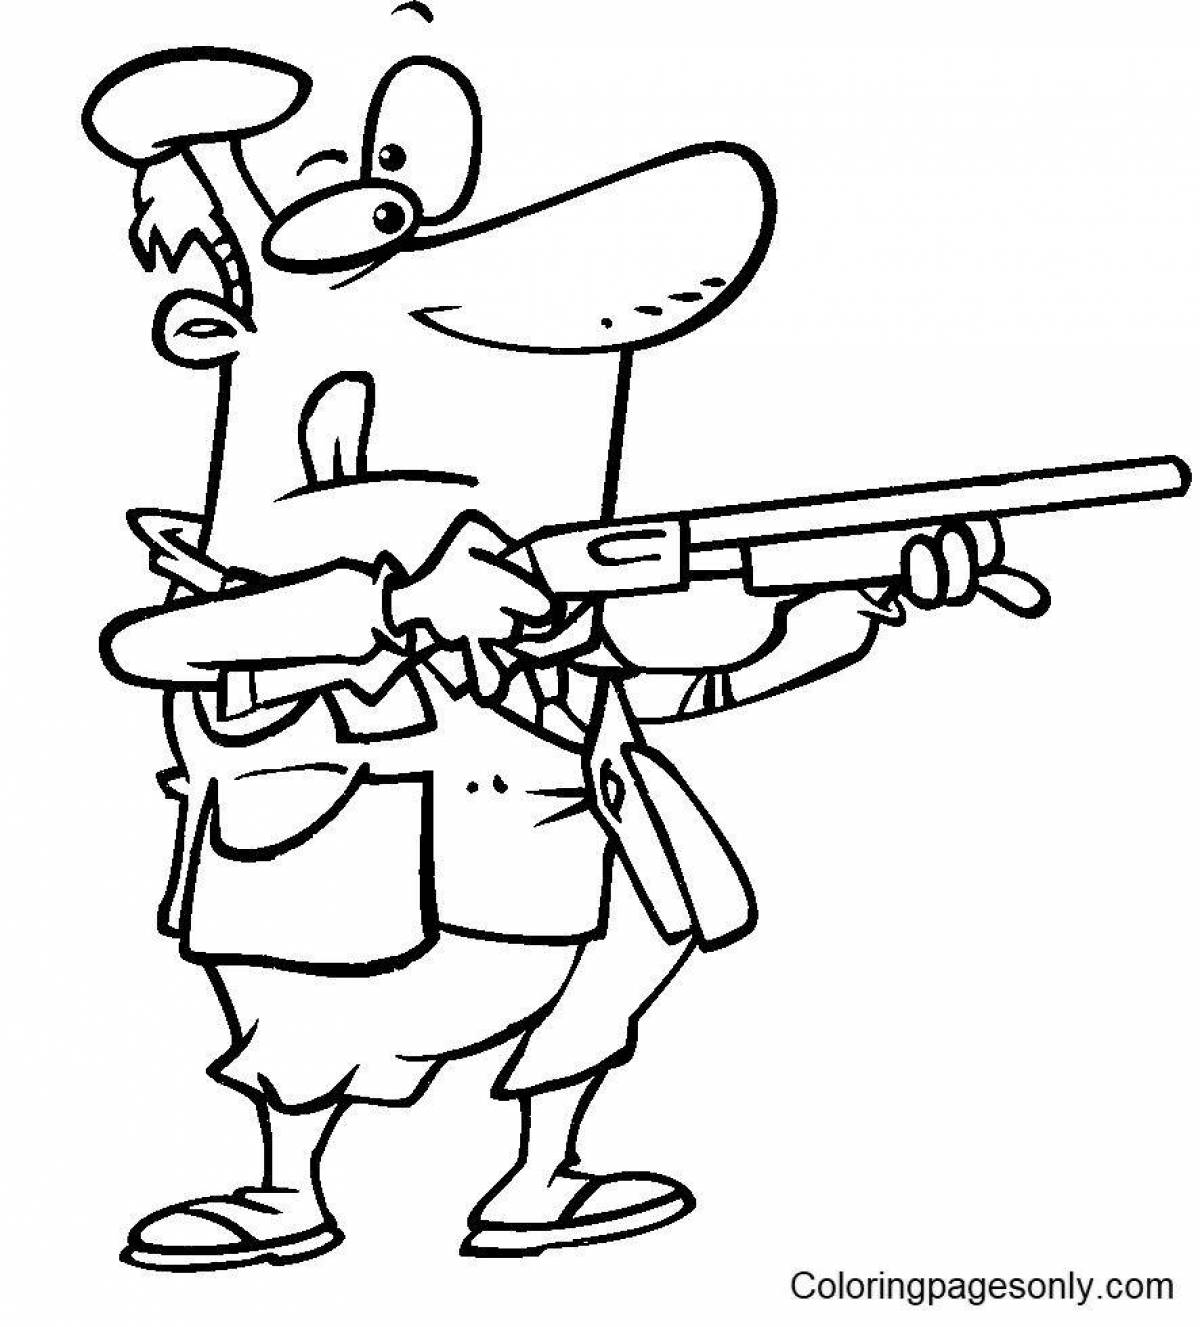 Coloring page graceful hunter with a gun